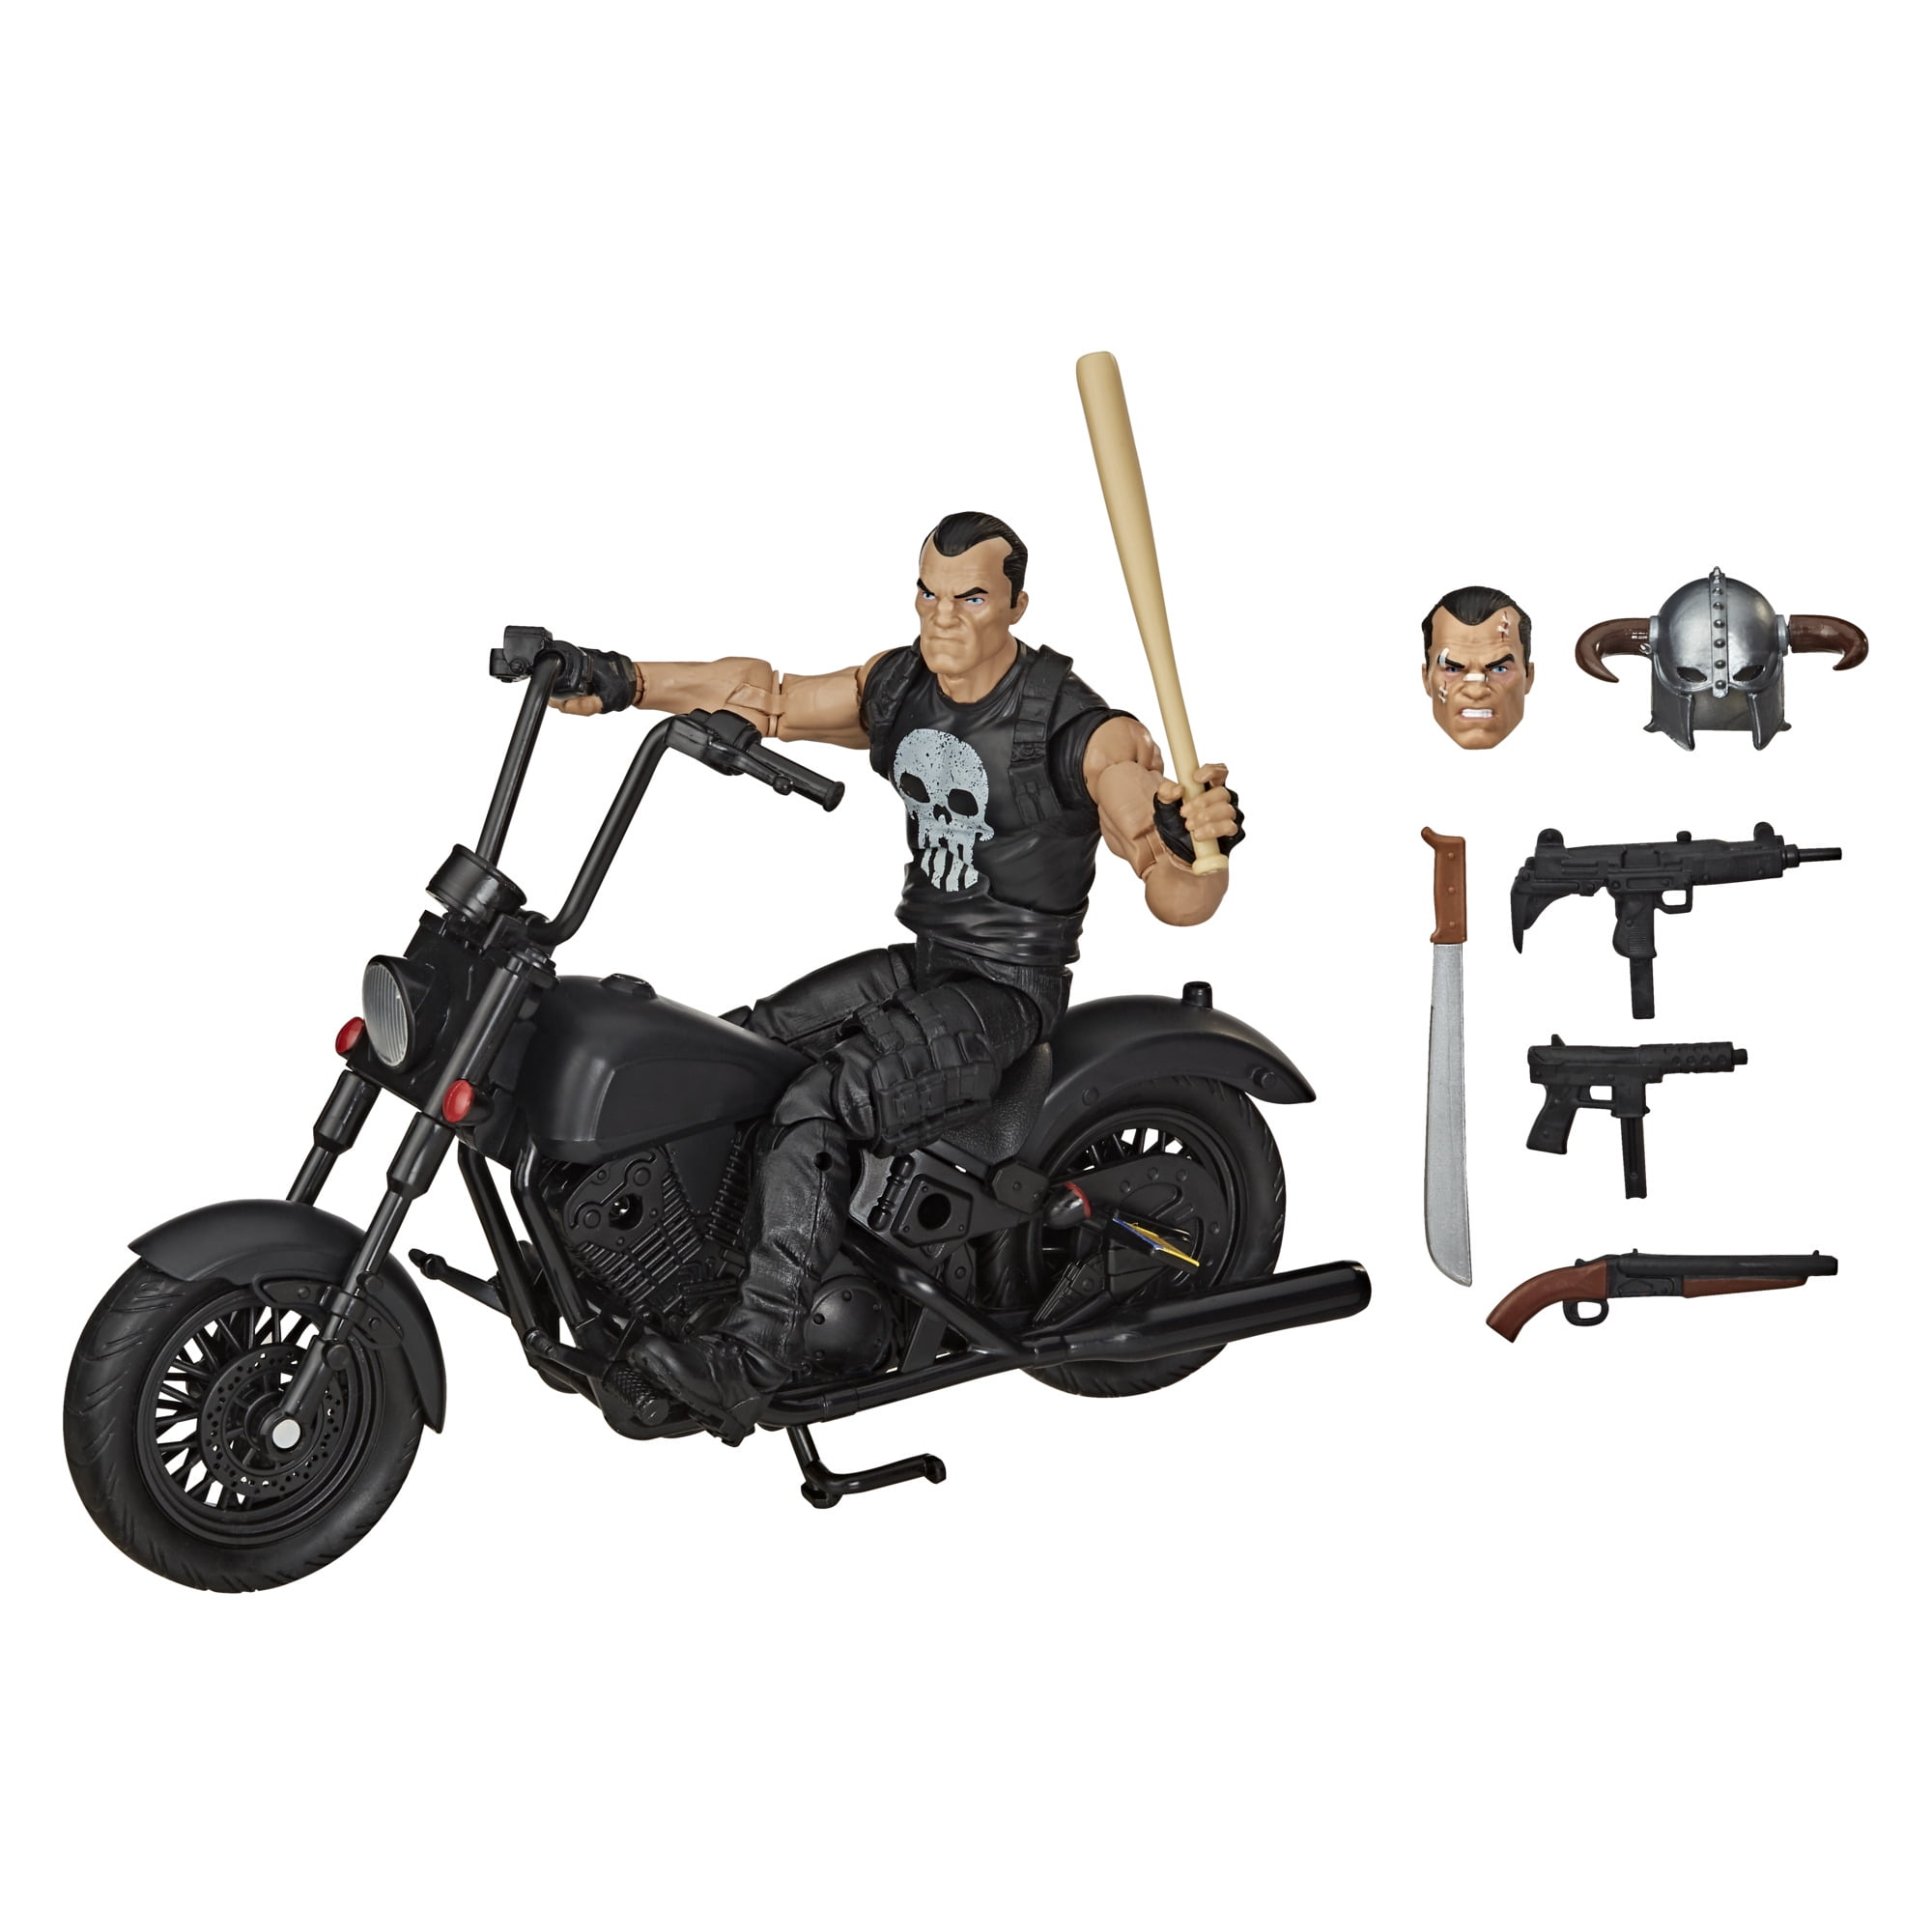 Marvel Legends 6" Frank Castle Ultimate Riders Punisher FIGURE WEAPONS ONLY 